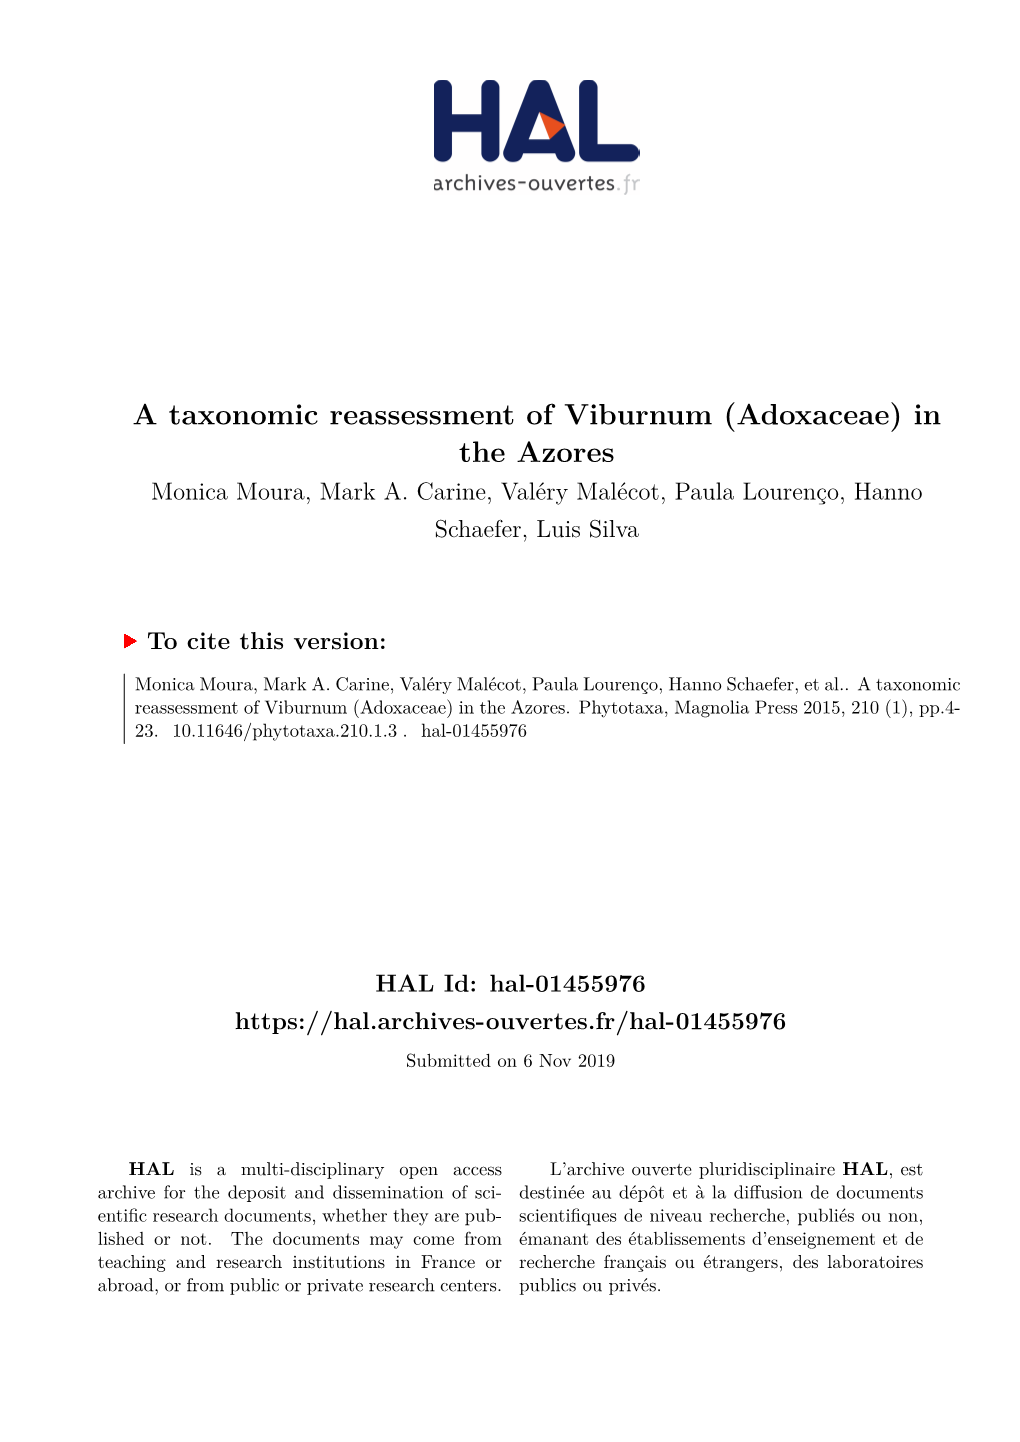 A Taxonomic Reassessment of Viburnum (Adoxaceae) in the Azores Monica Moura, Mark A